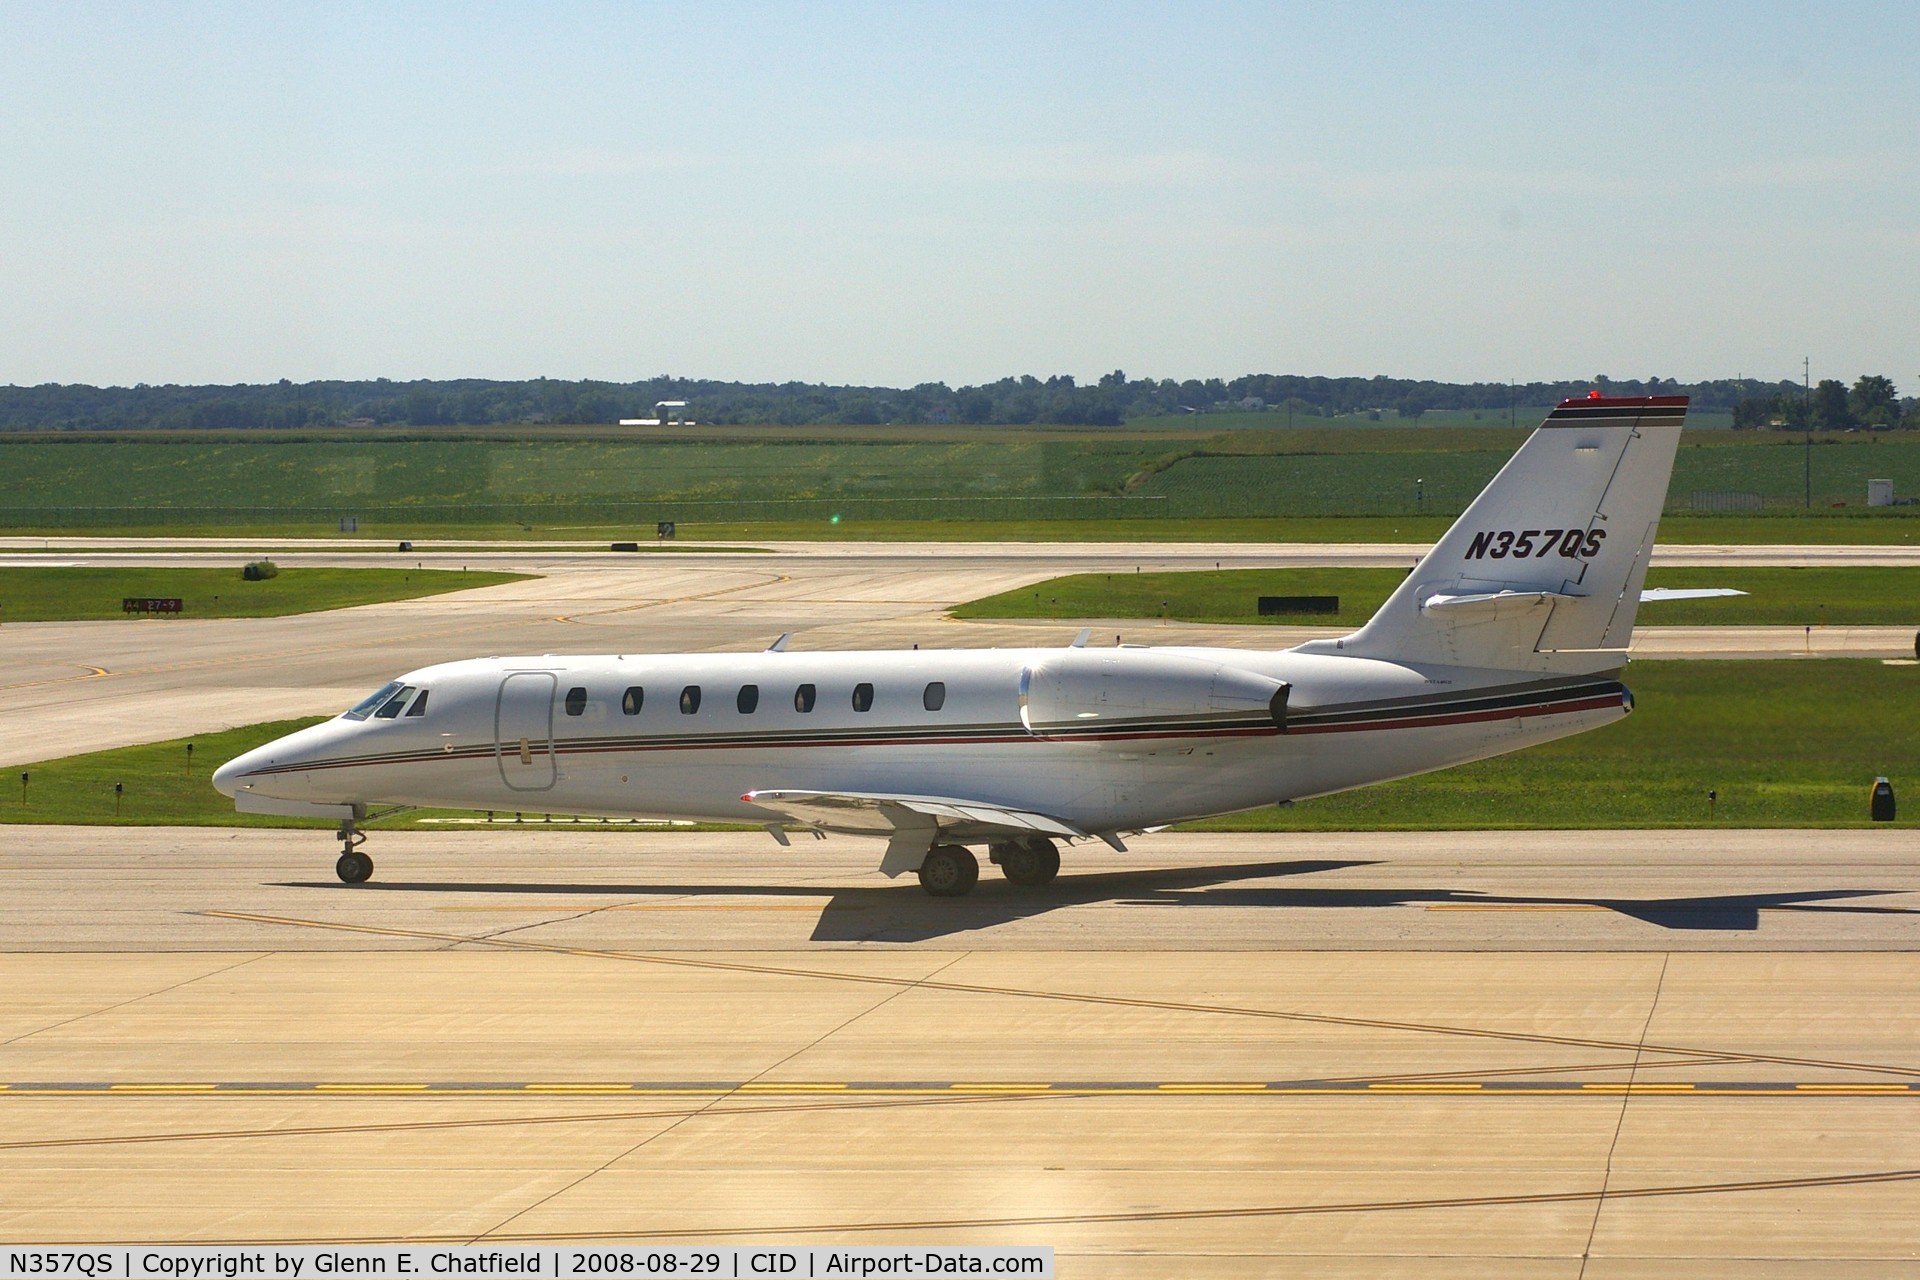 N357QS, 2007 Cessna 680 Citation Sovereign C/N 680-0155, Taxiing to Runway 27 for departure.